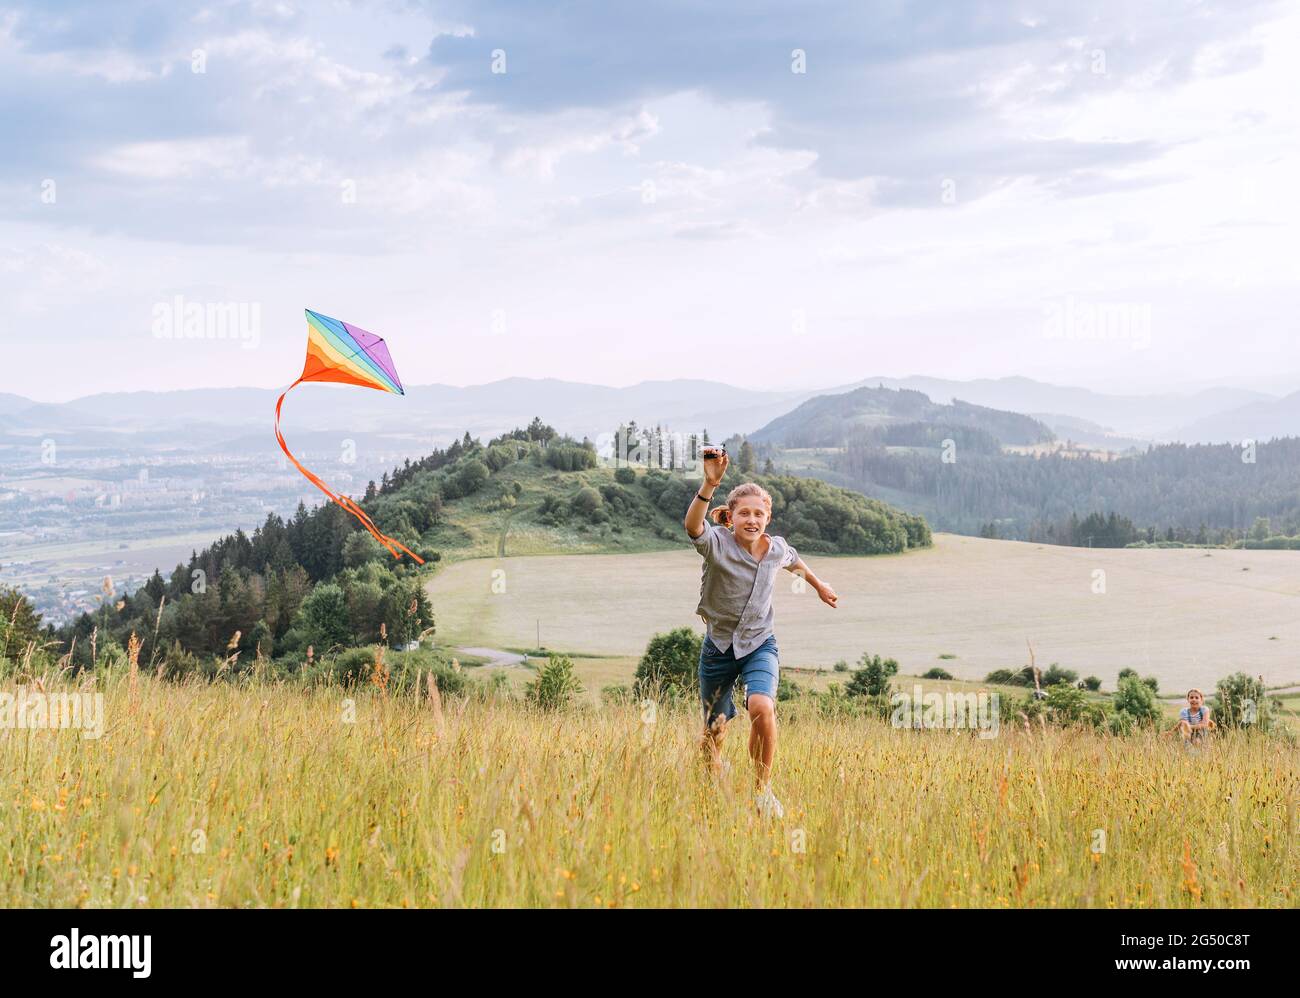 Smiling teenager boy with flying colorful kite on the high grass meadow in the mountain fields. Happy childhood moments or outdoor time spending conce Stock Photo